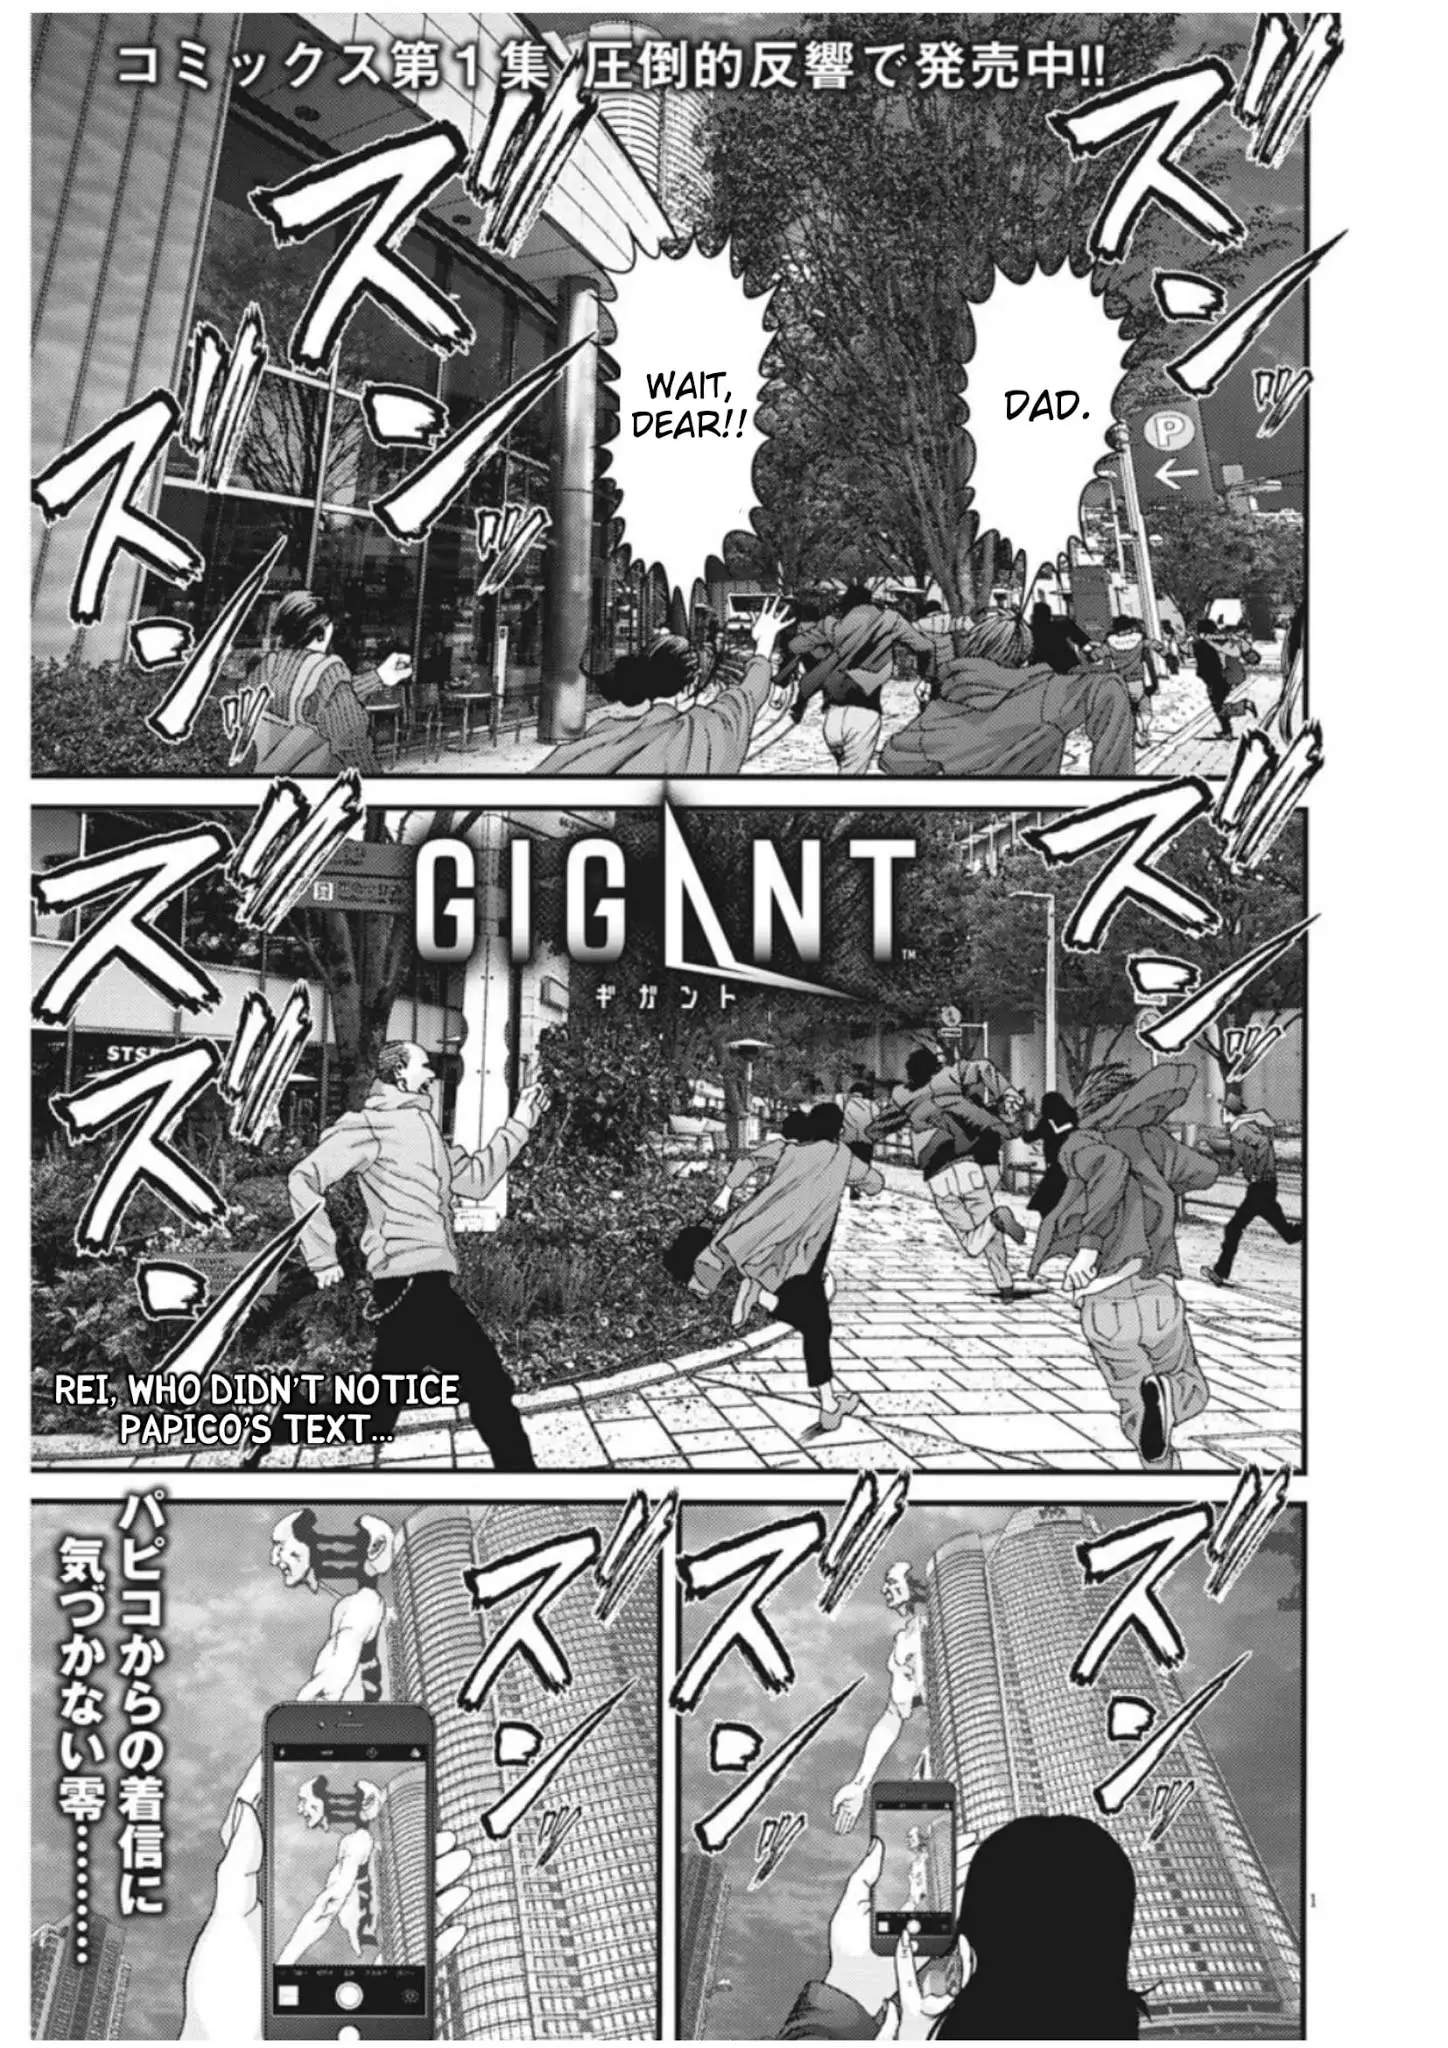 Gigant - 16 page 2